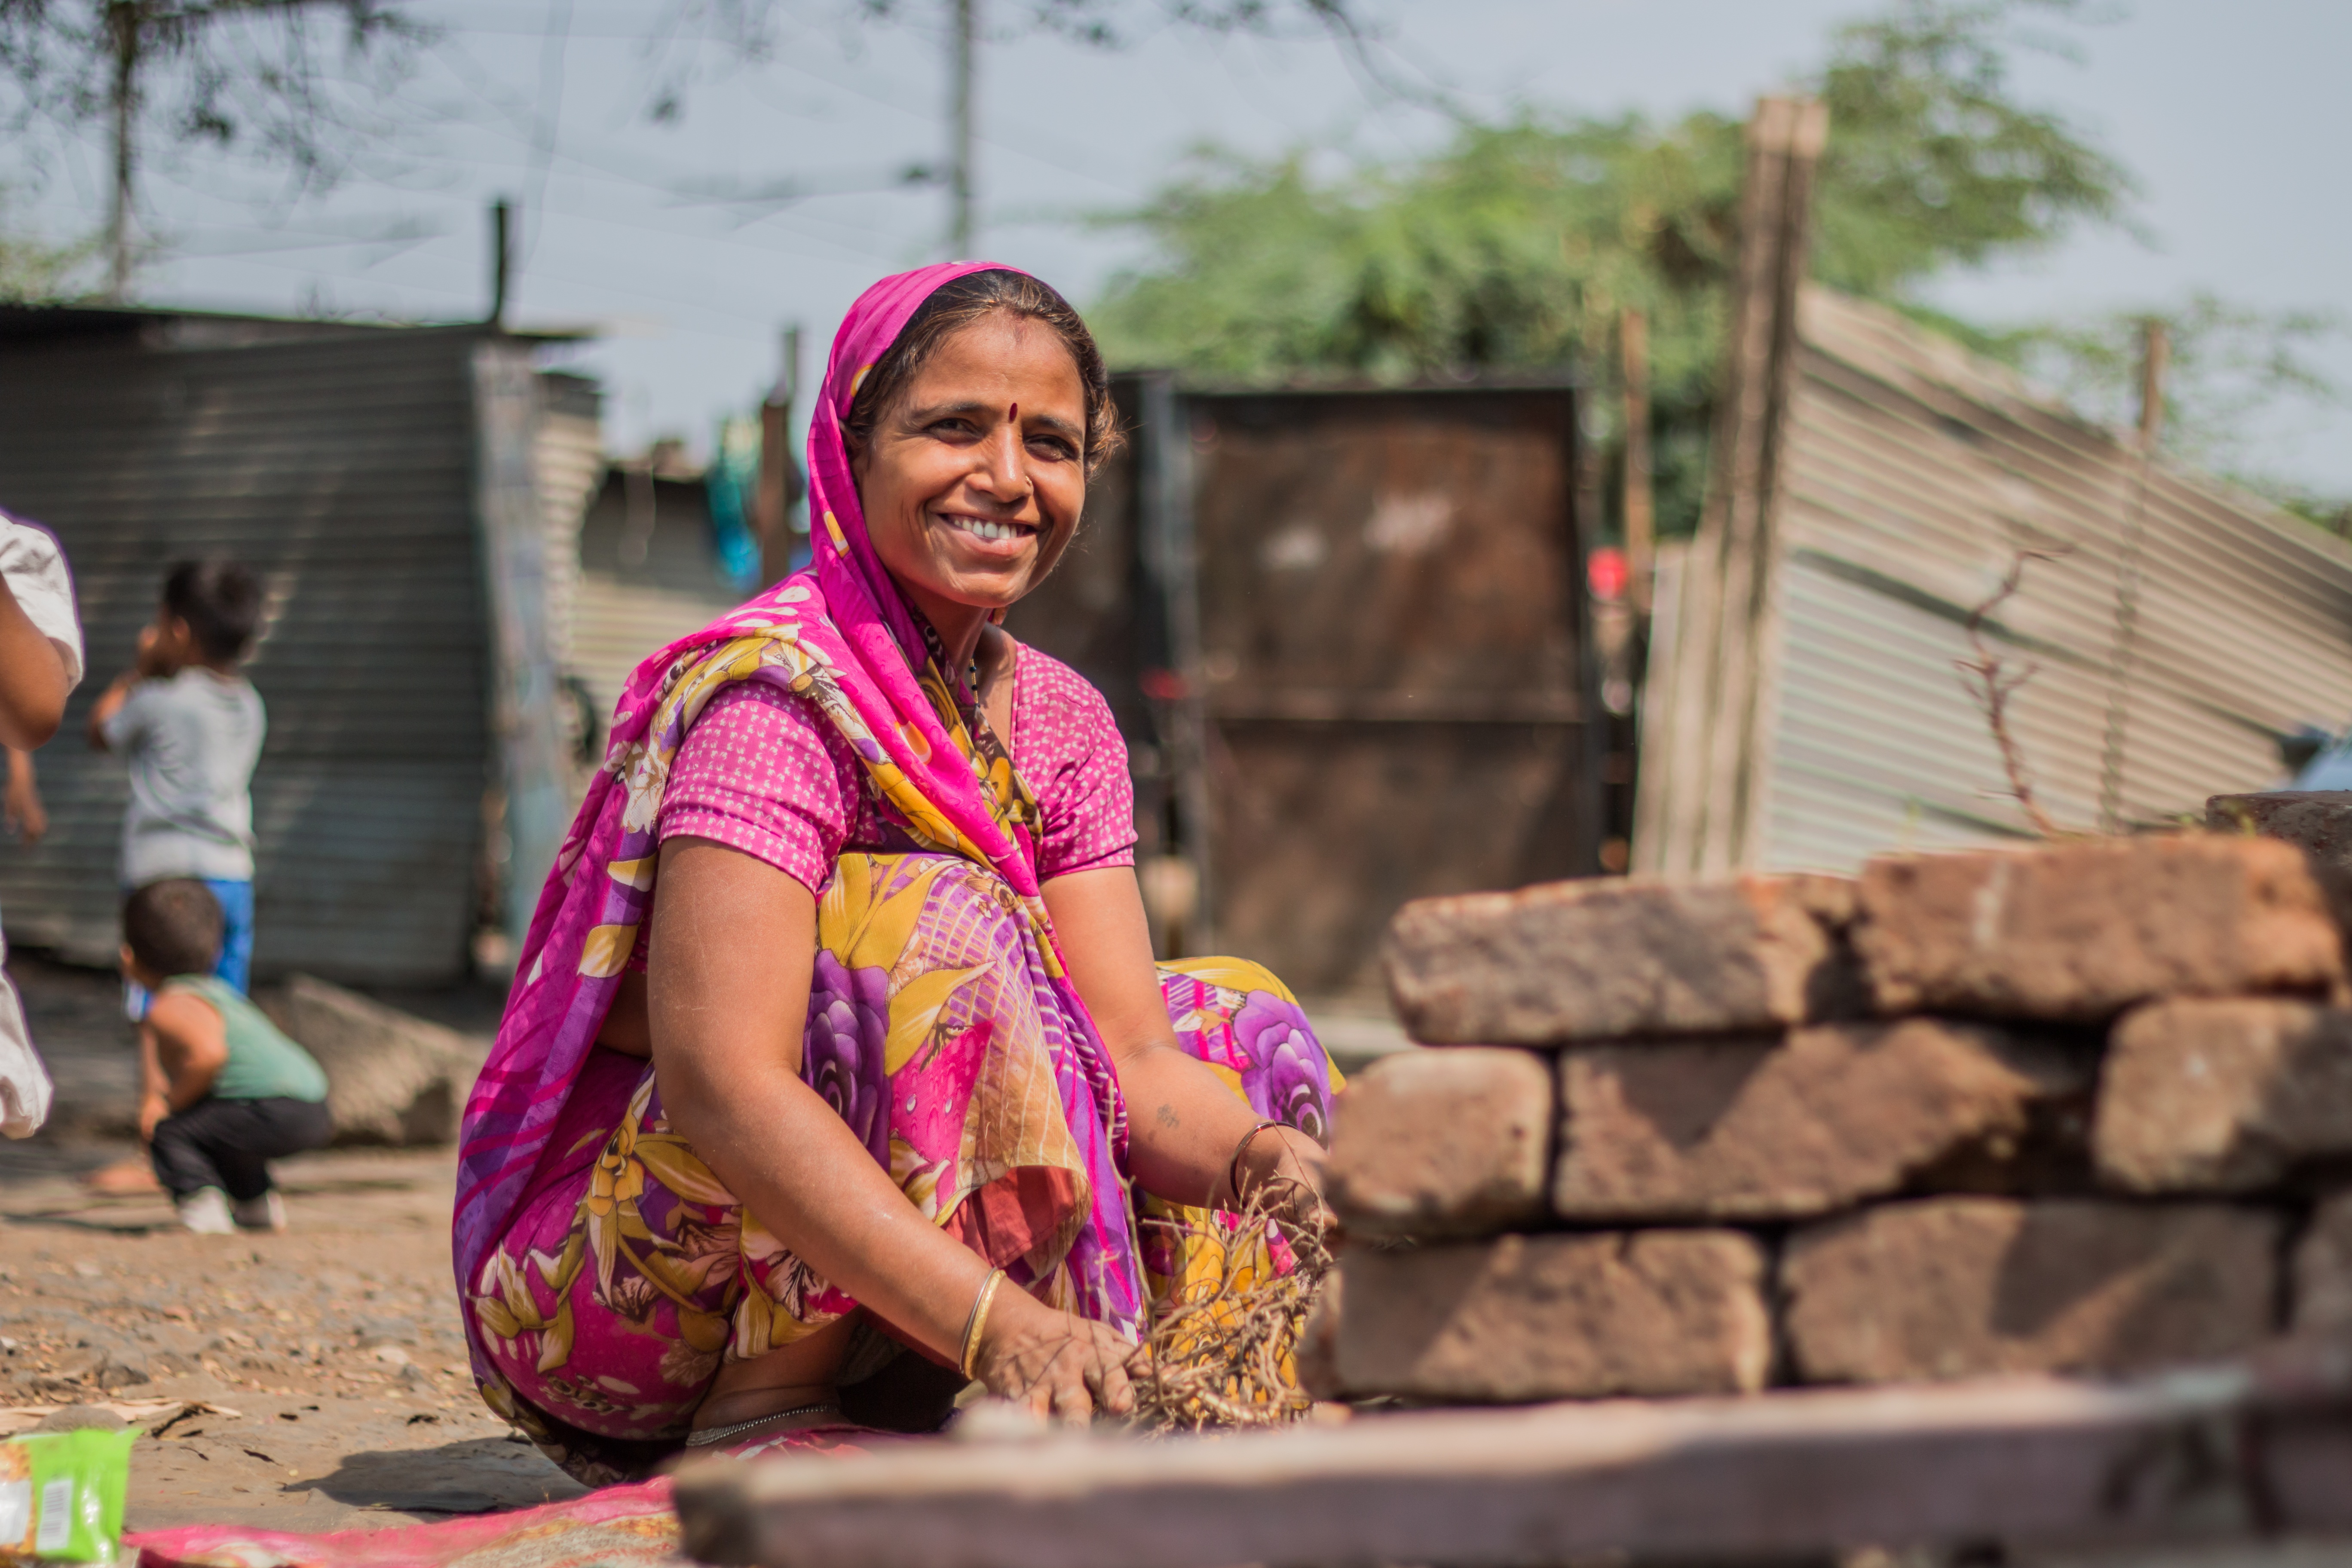 A woman in India. She is wearing a pink robe and is smiling.